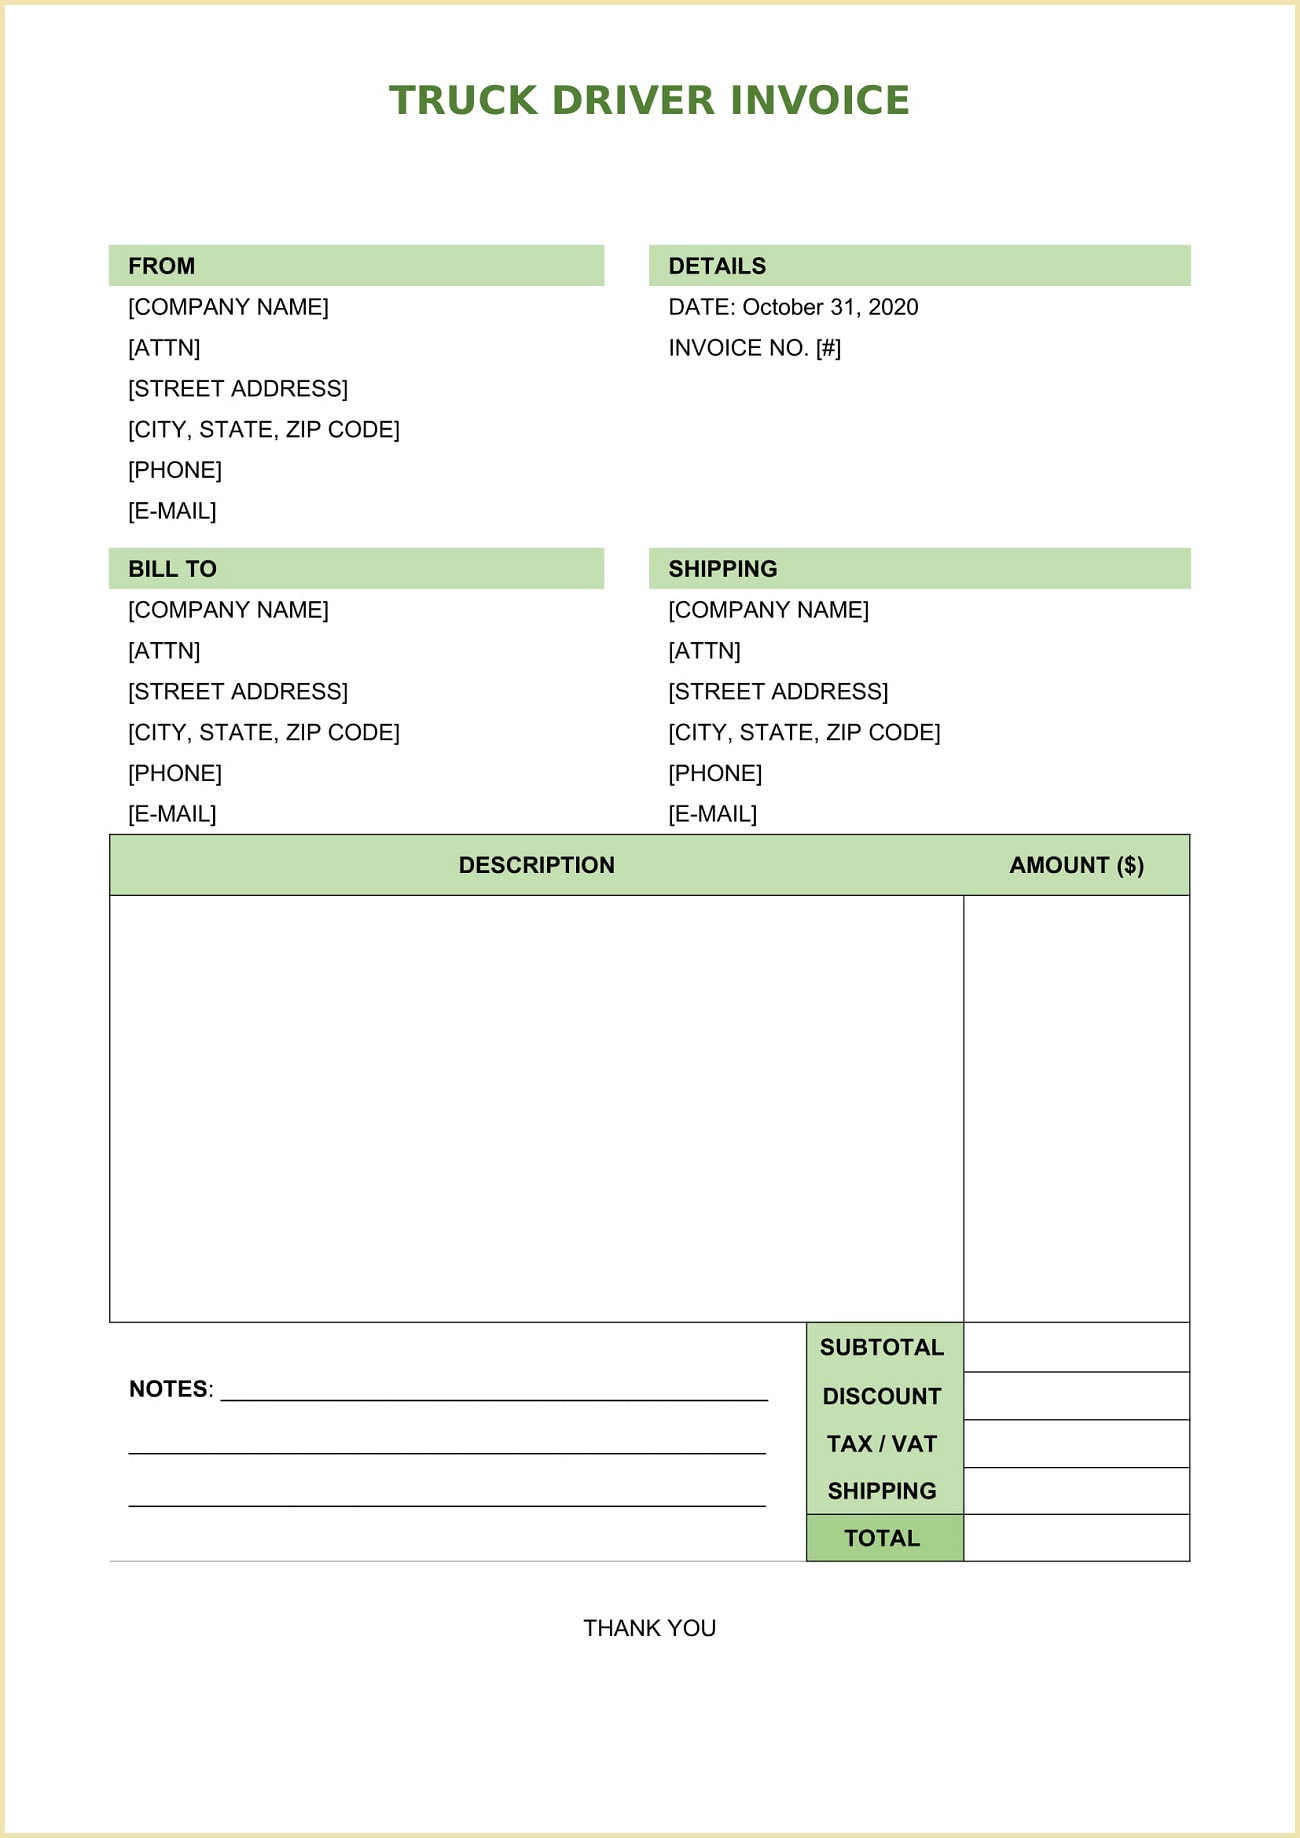 Truck Driver Invoice Template Sample | Geneevarojr in Free Delivery Driver Contract Template